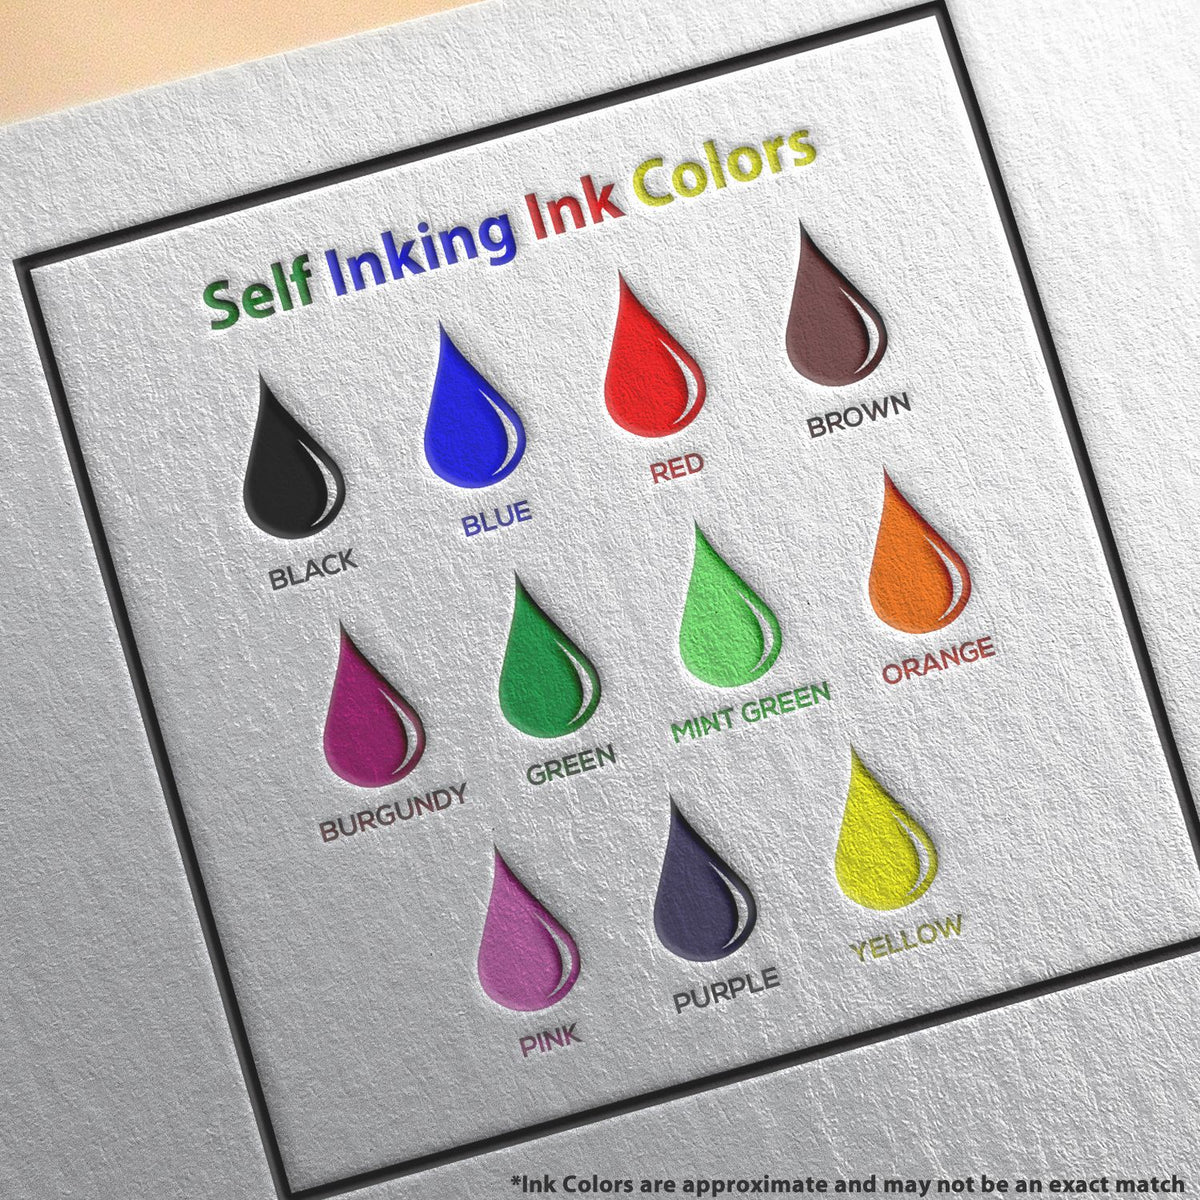 A picture showing the different ink colors or hues available for the Self-Inking Maryland Landscape Architect Stamp product.